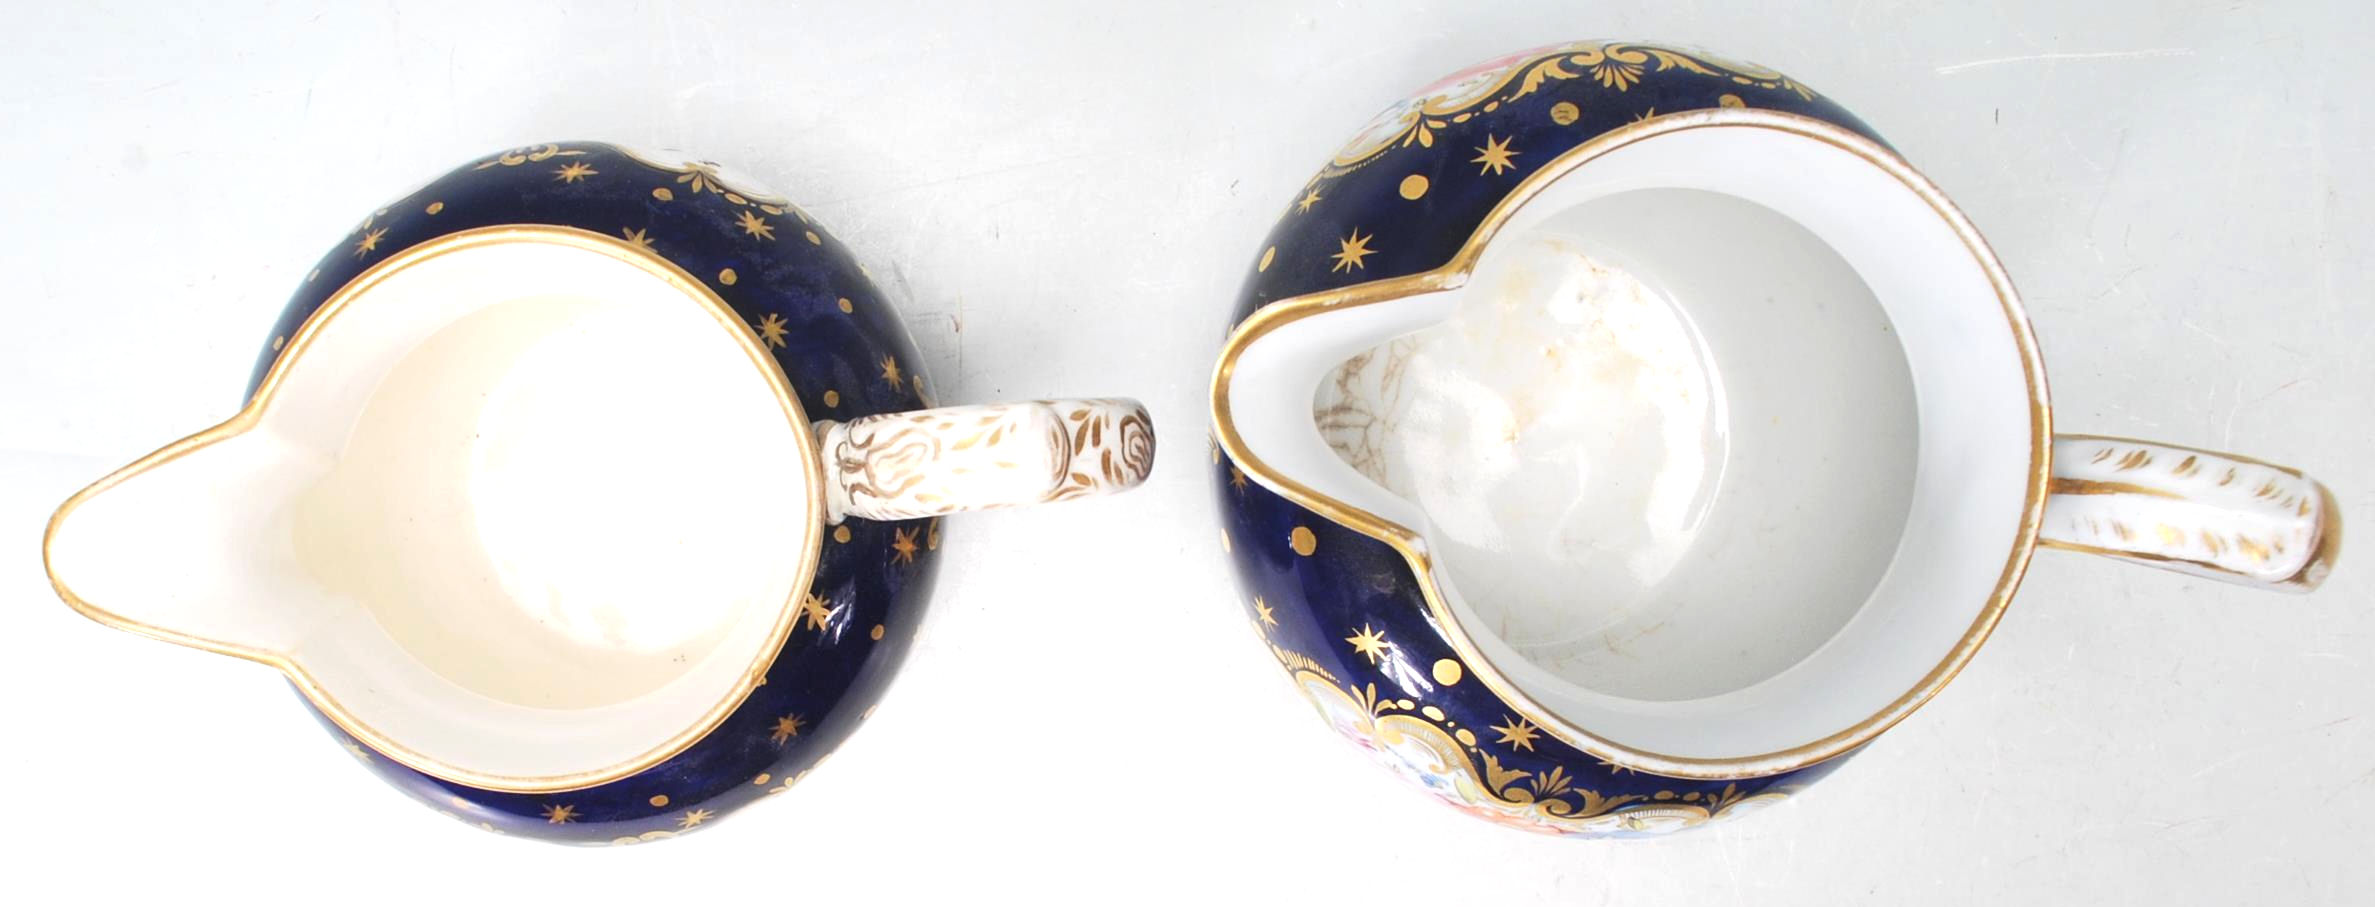 PAIR OF VICTORIAN 19TH CENTURY COBALT BLUE AND GILT JUGS - Image 2 of 8